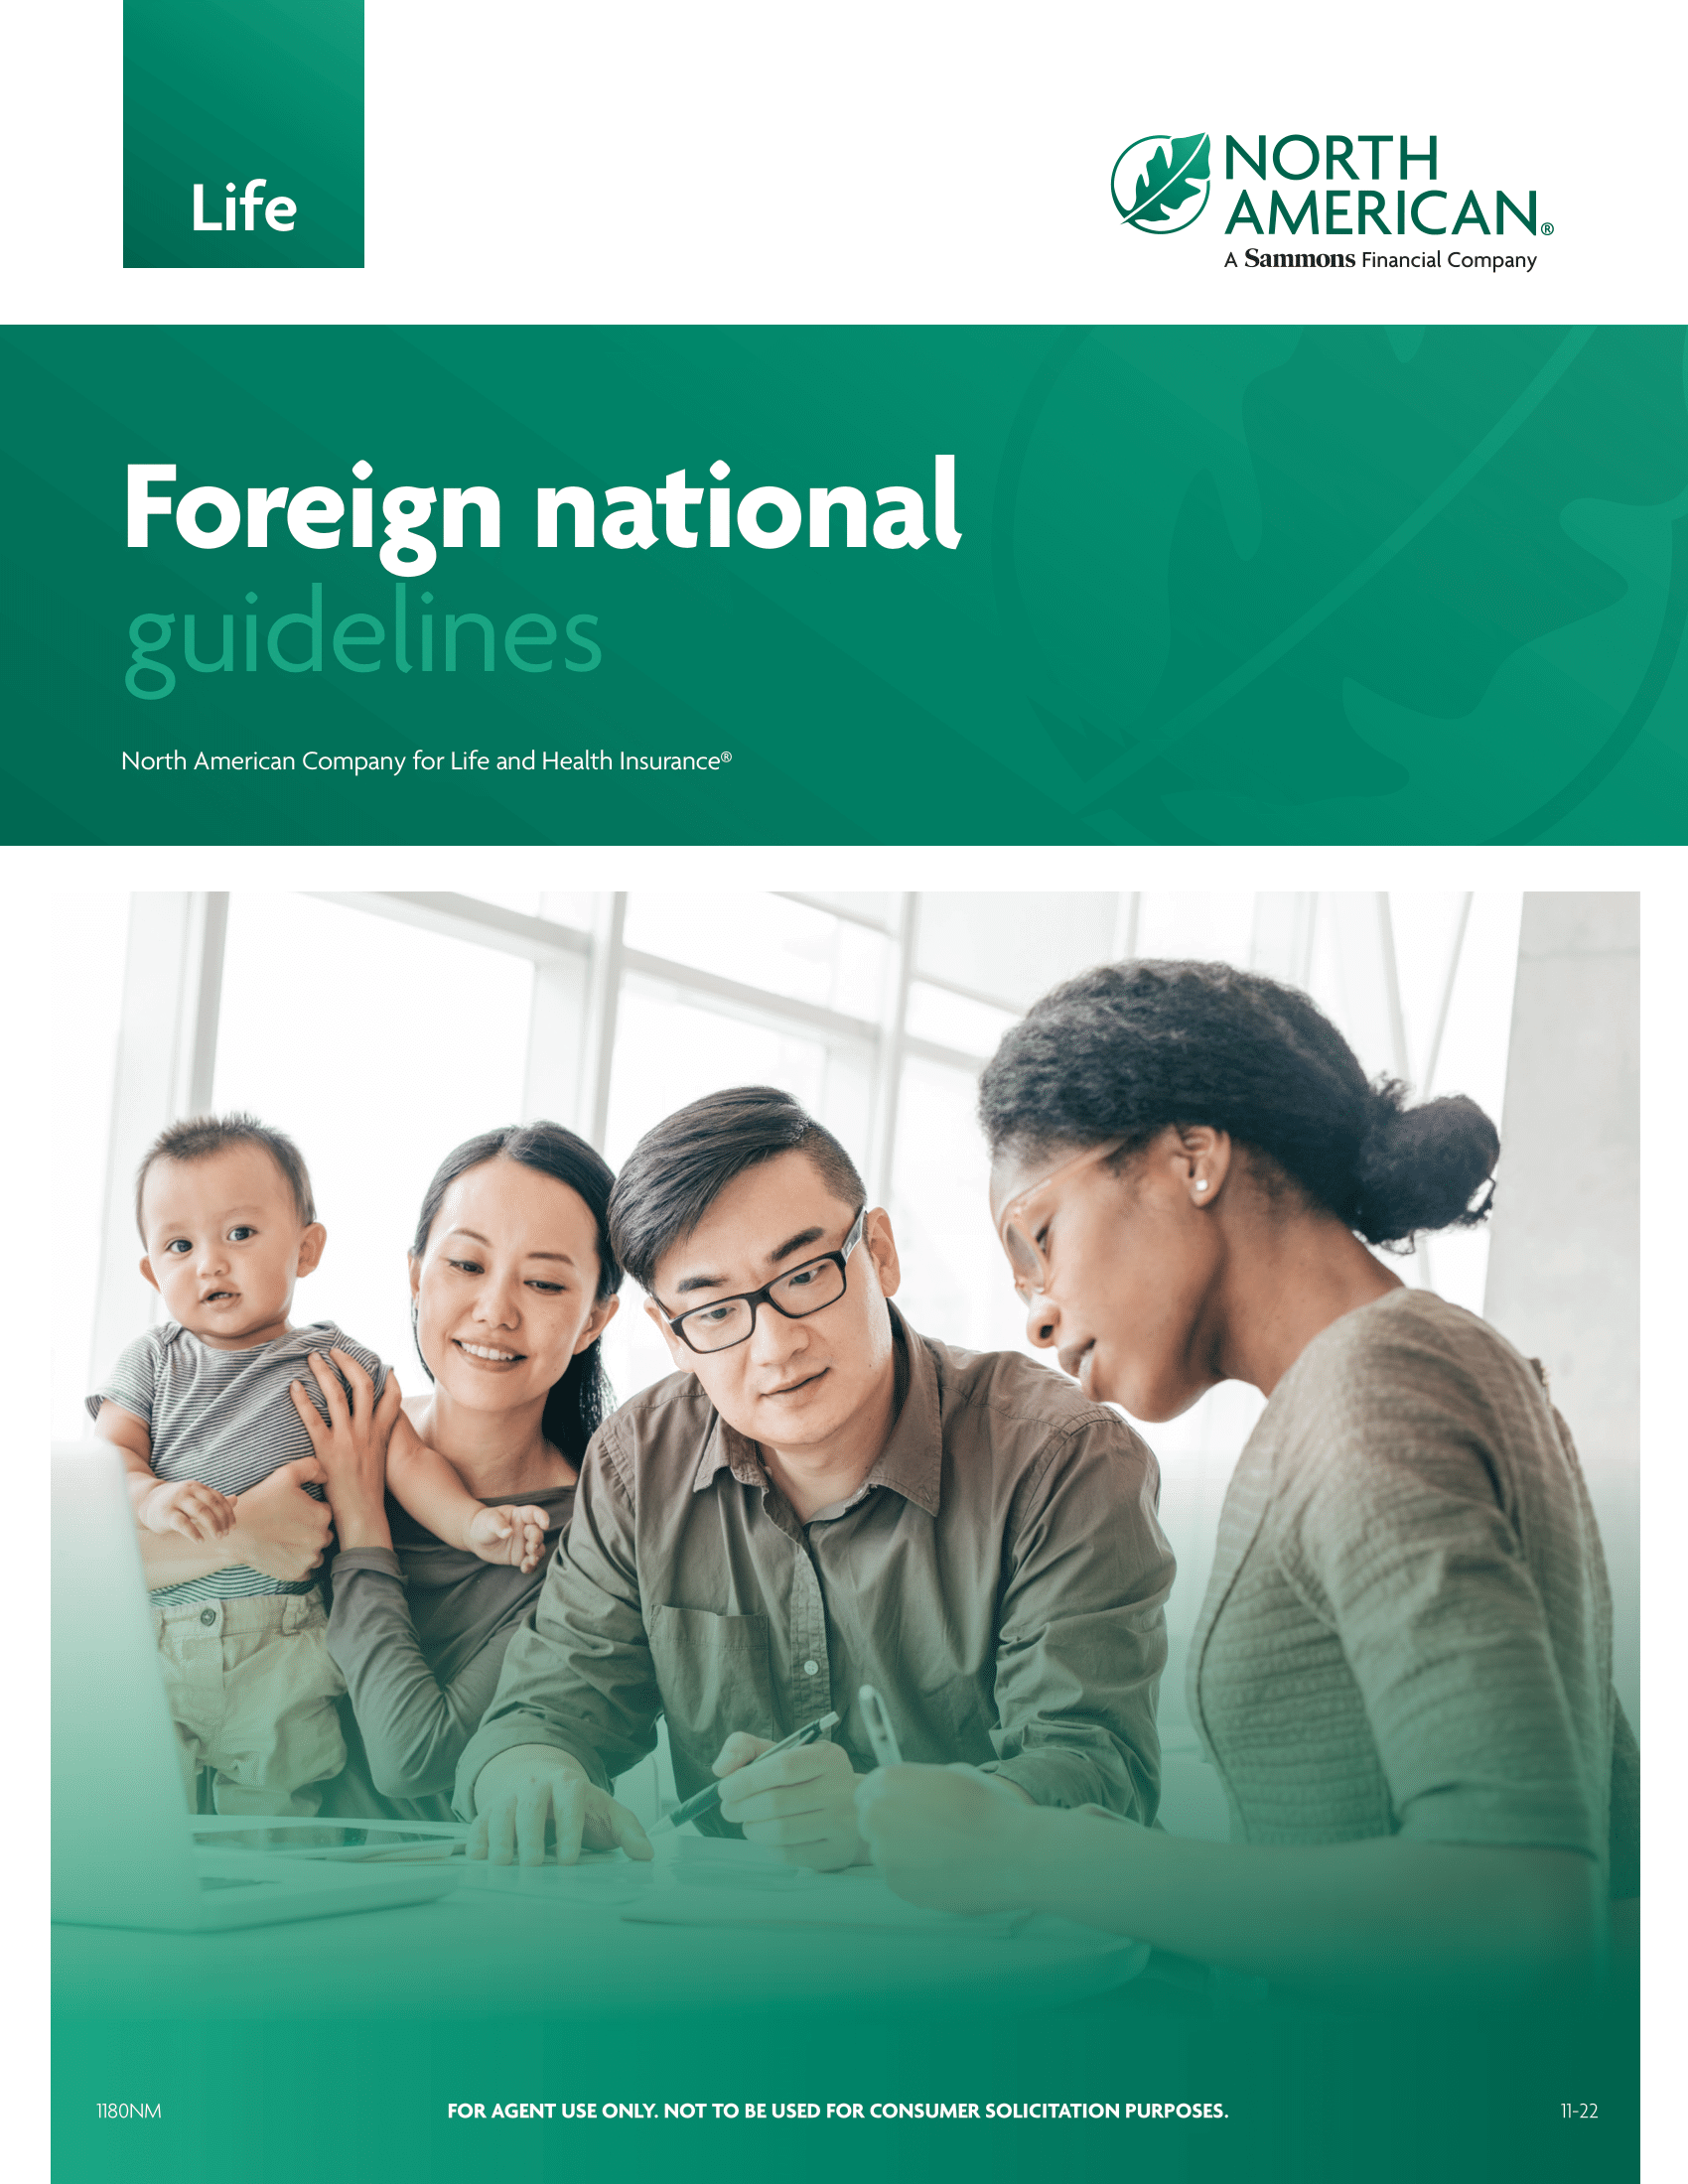 Foreign National Guidelines